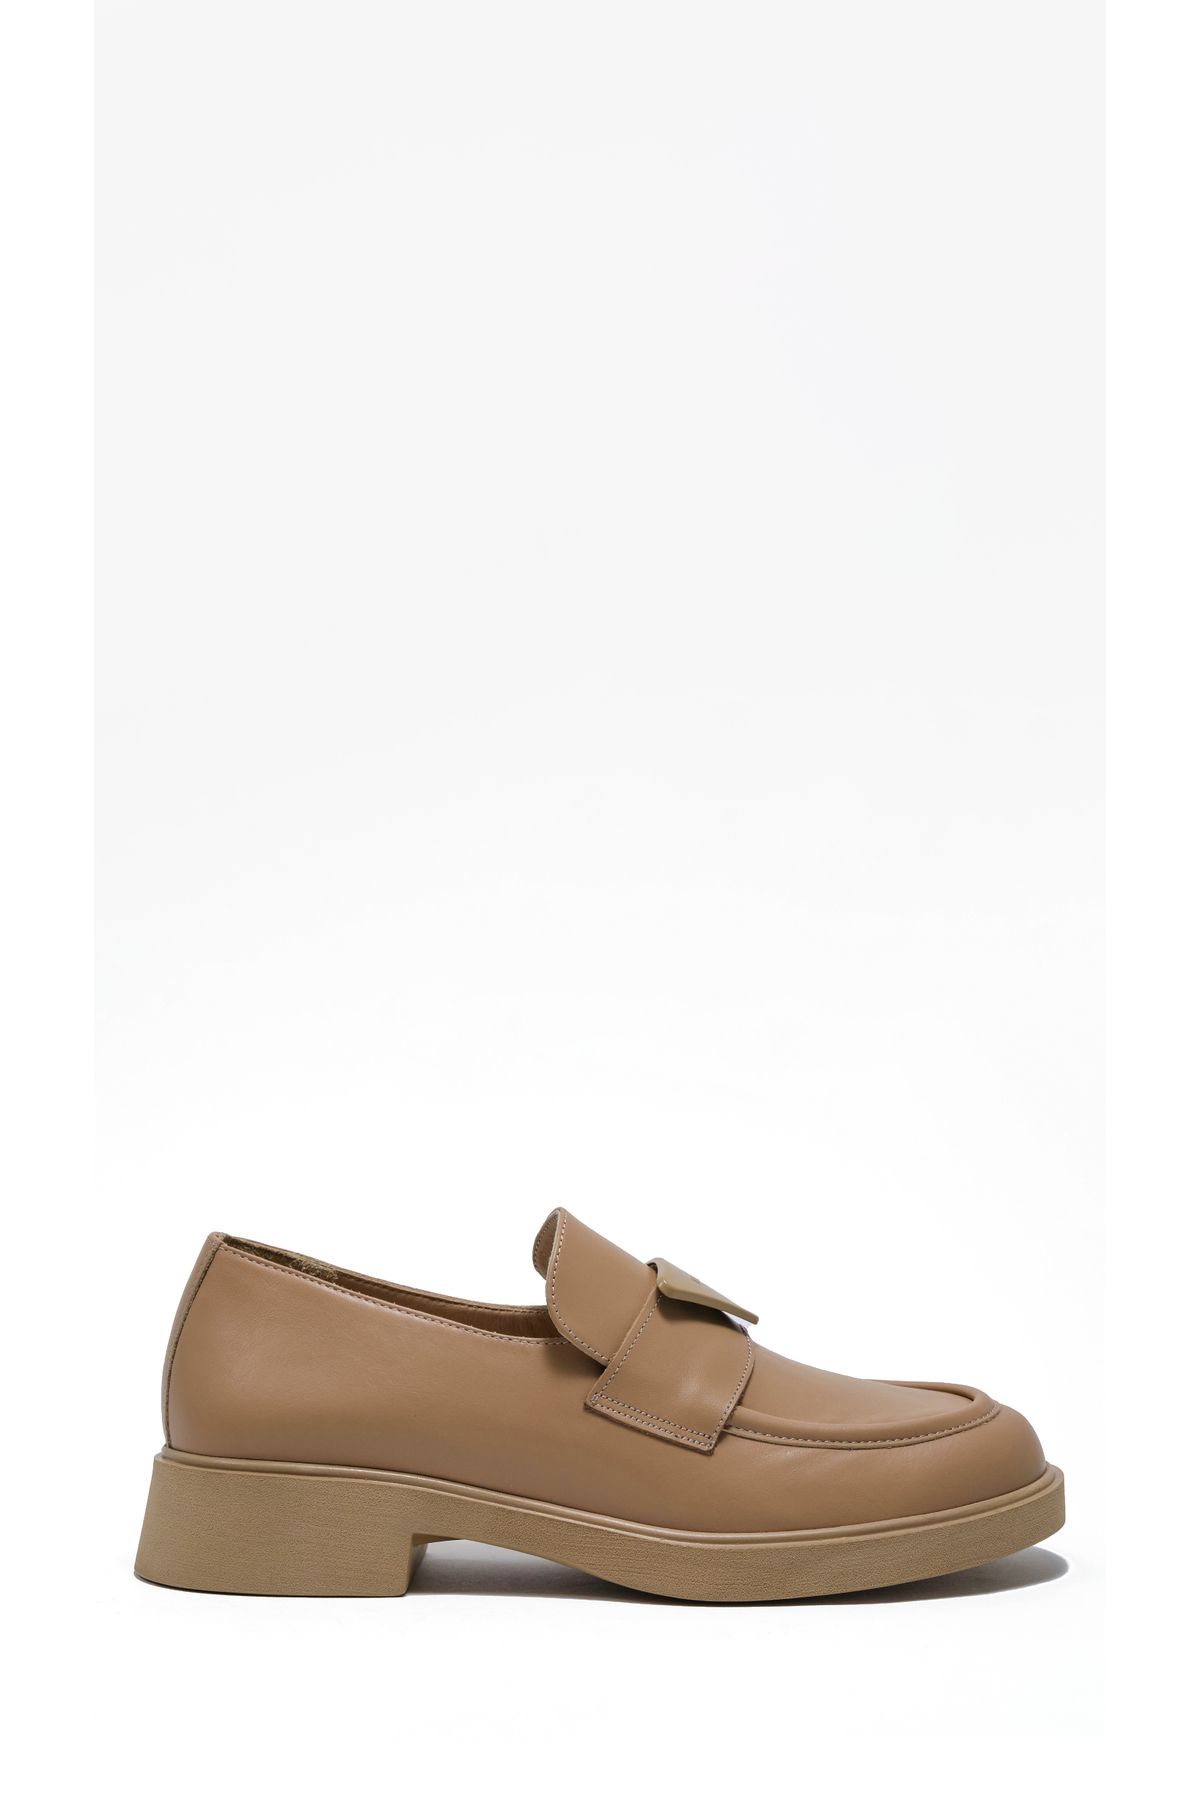 Gizzelli shoes Loafer